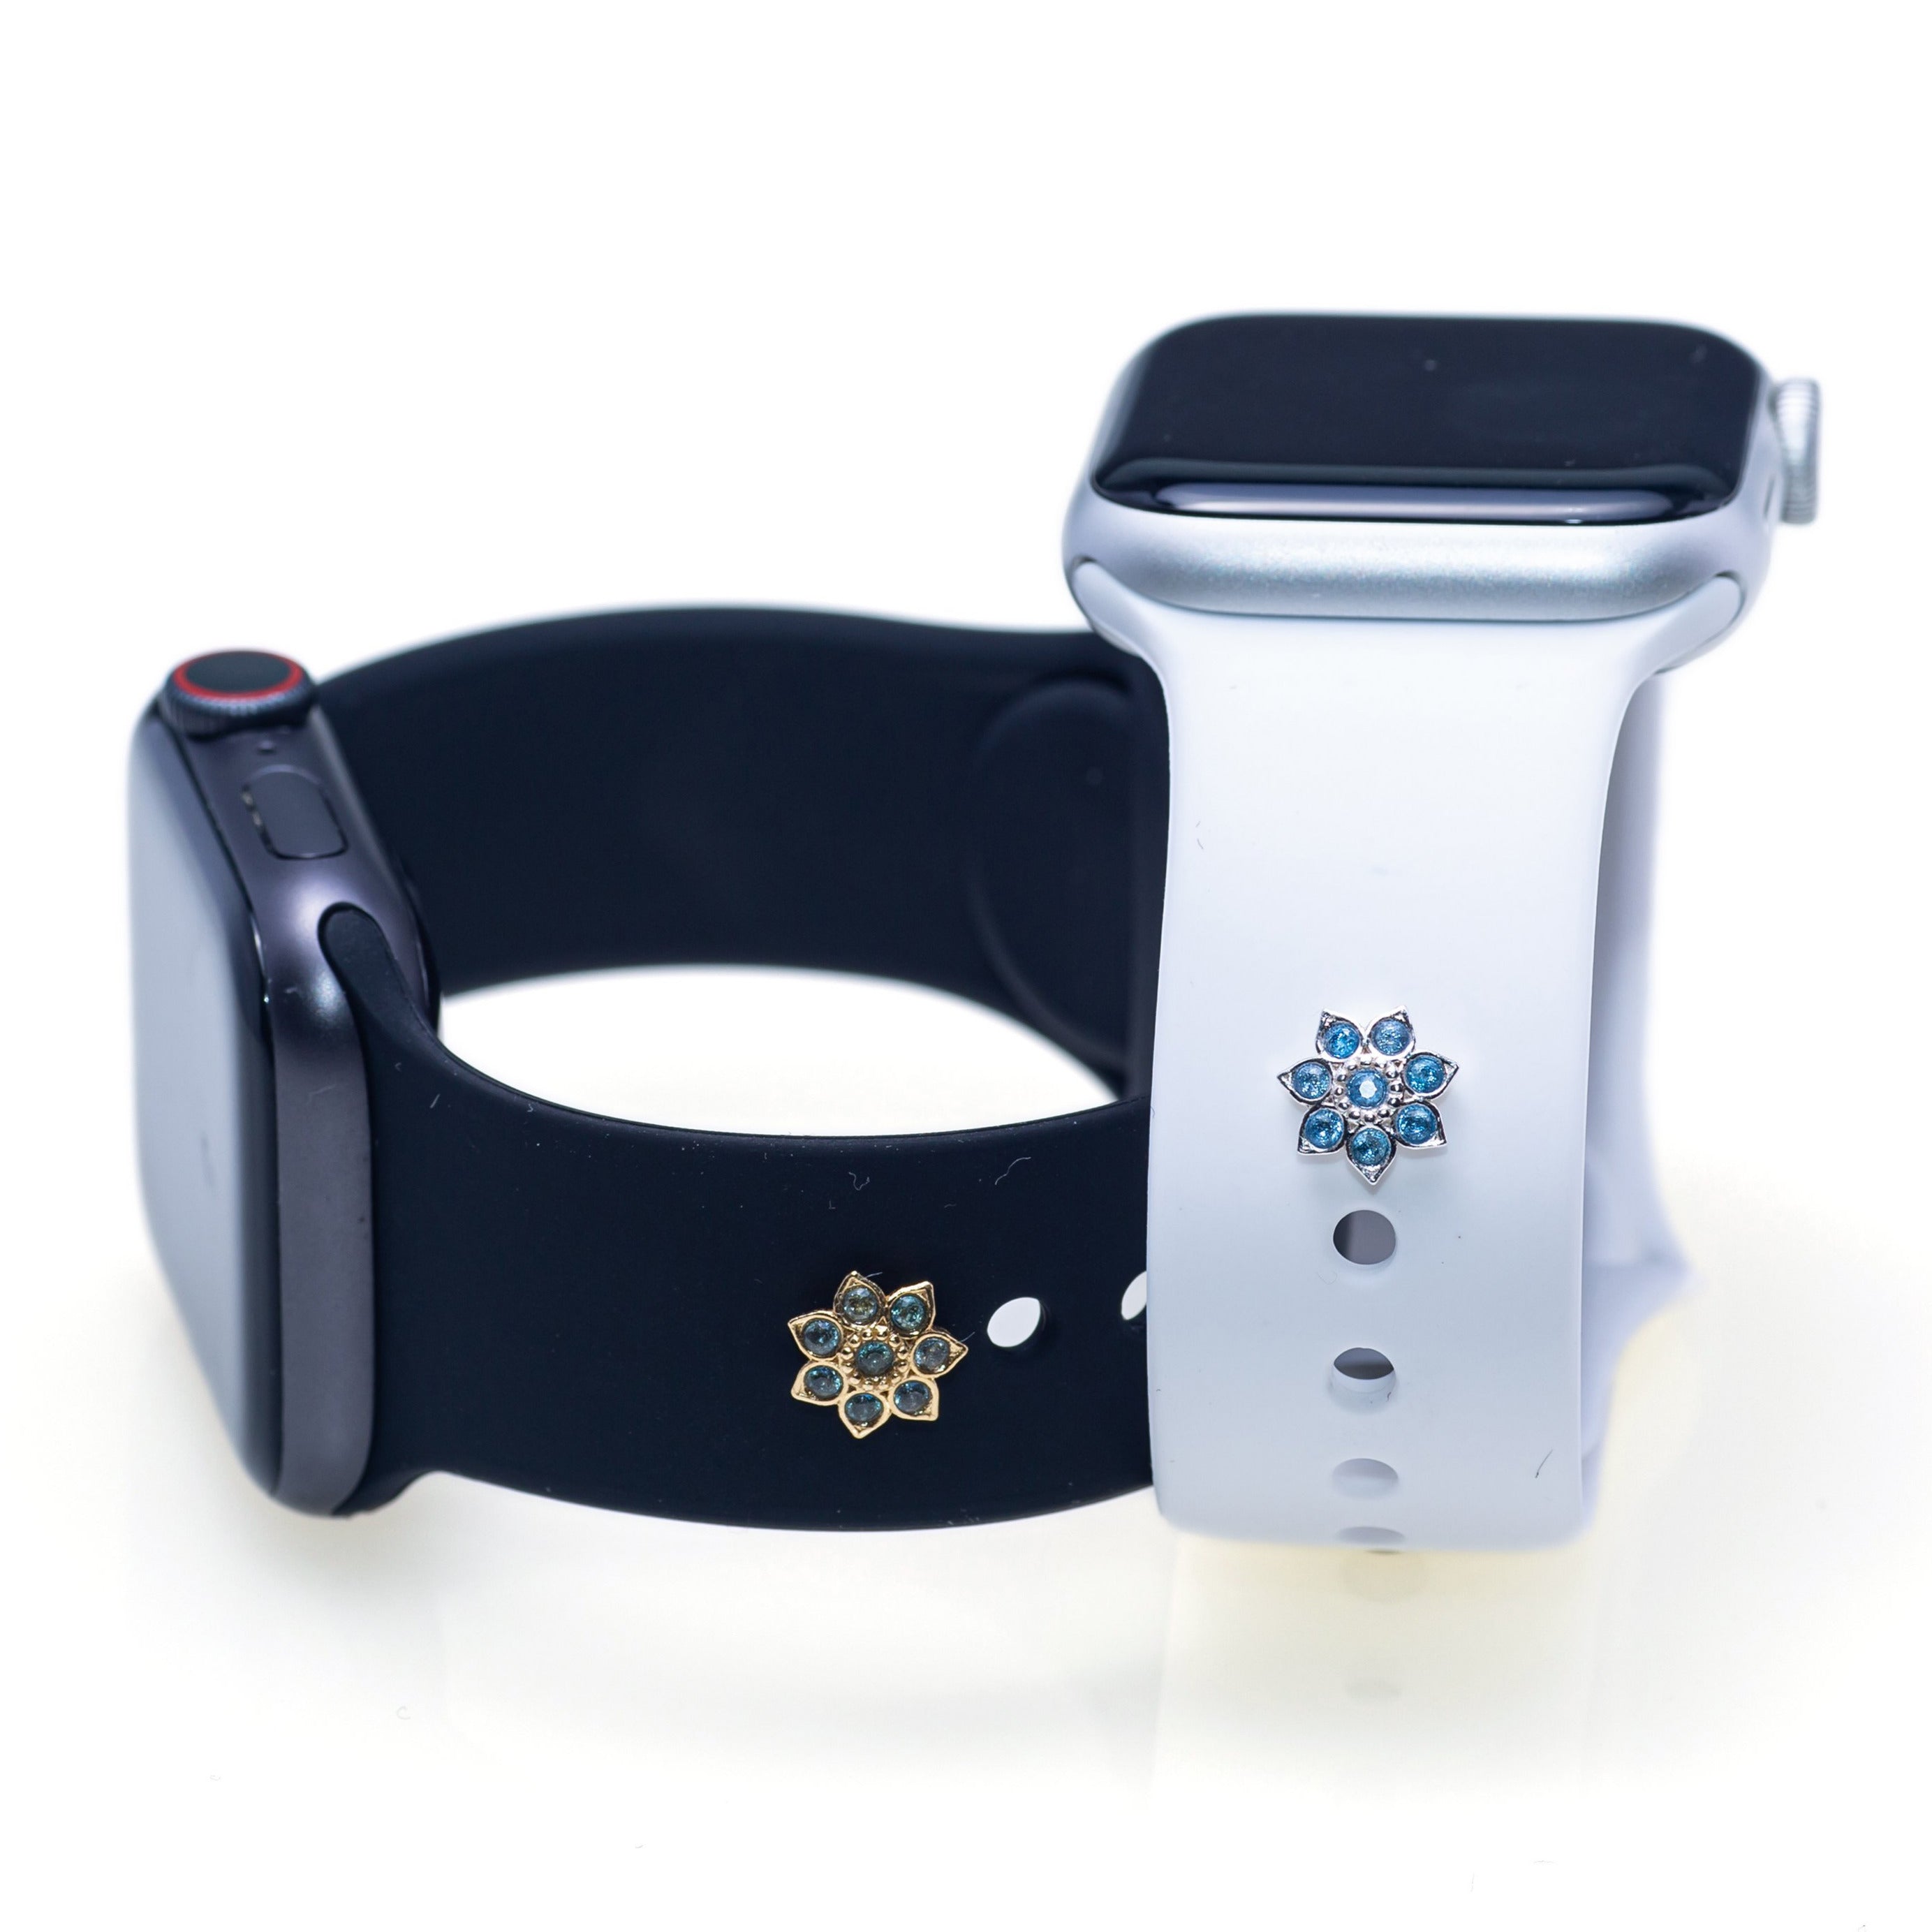 Flower with Swarovski Cuff Accessory for Apple Watch Band